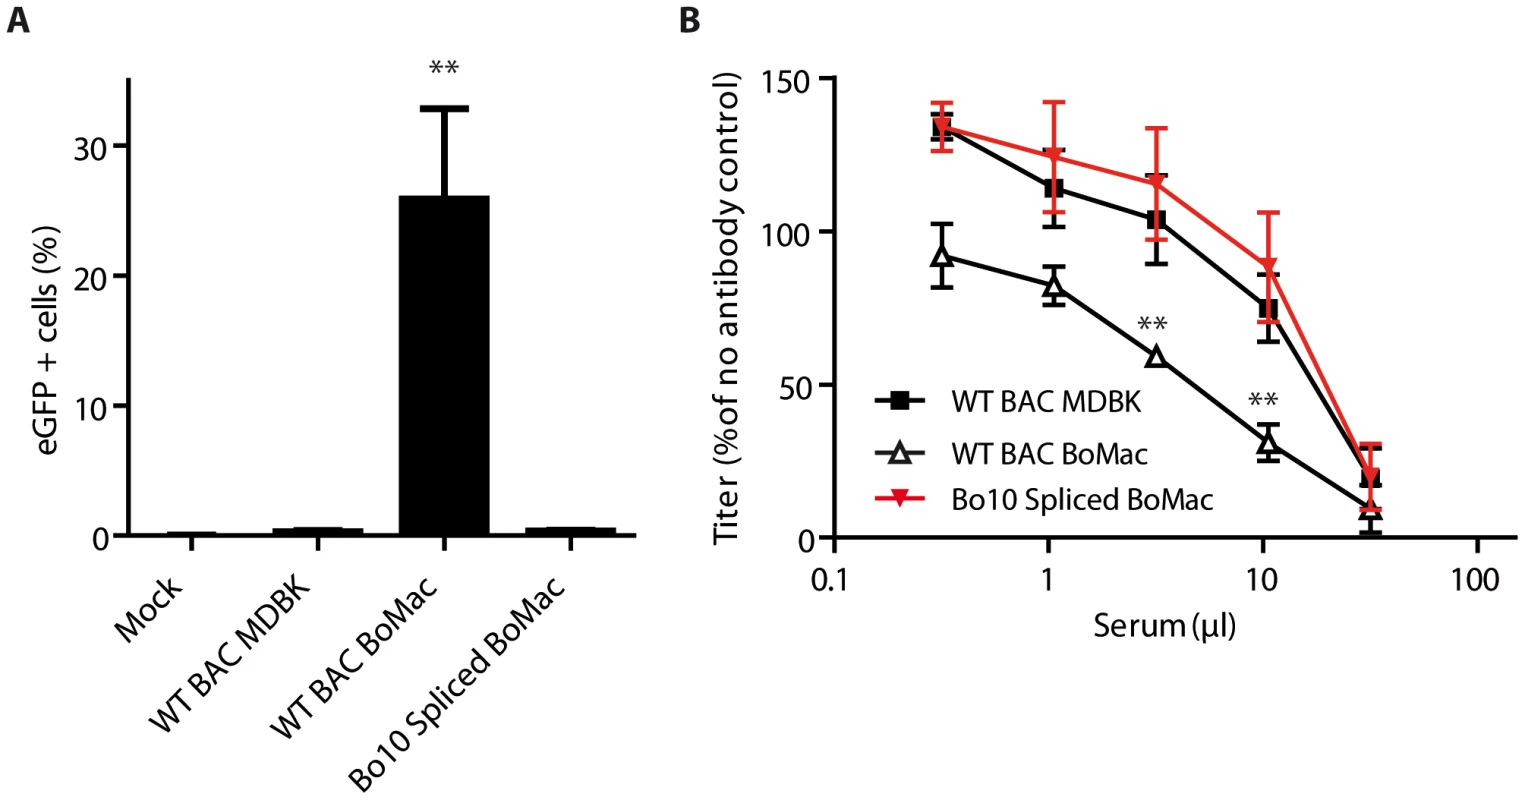 Expression of the spliced form of Bo10 mRNA reverts the phenotype of myeloid virions.